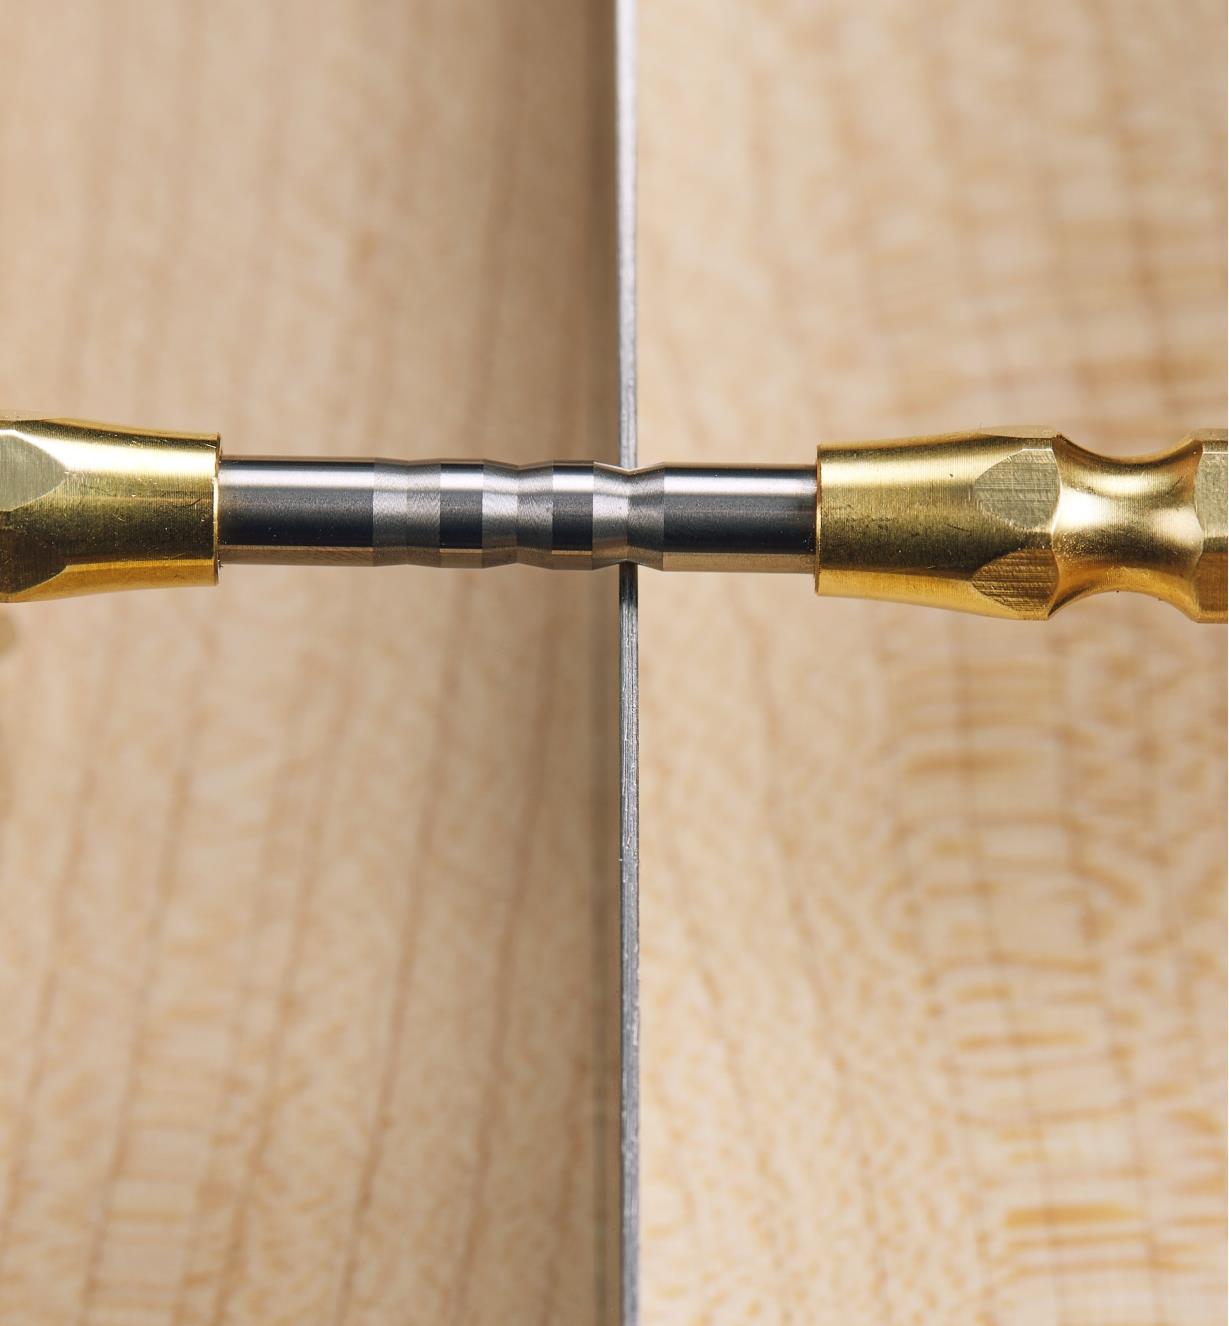 A close-up view of an Accu-Burr handled burnisher rolling 15° hooks on the edge of a scraper